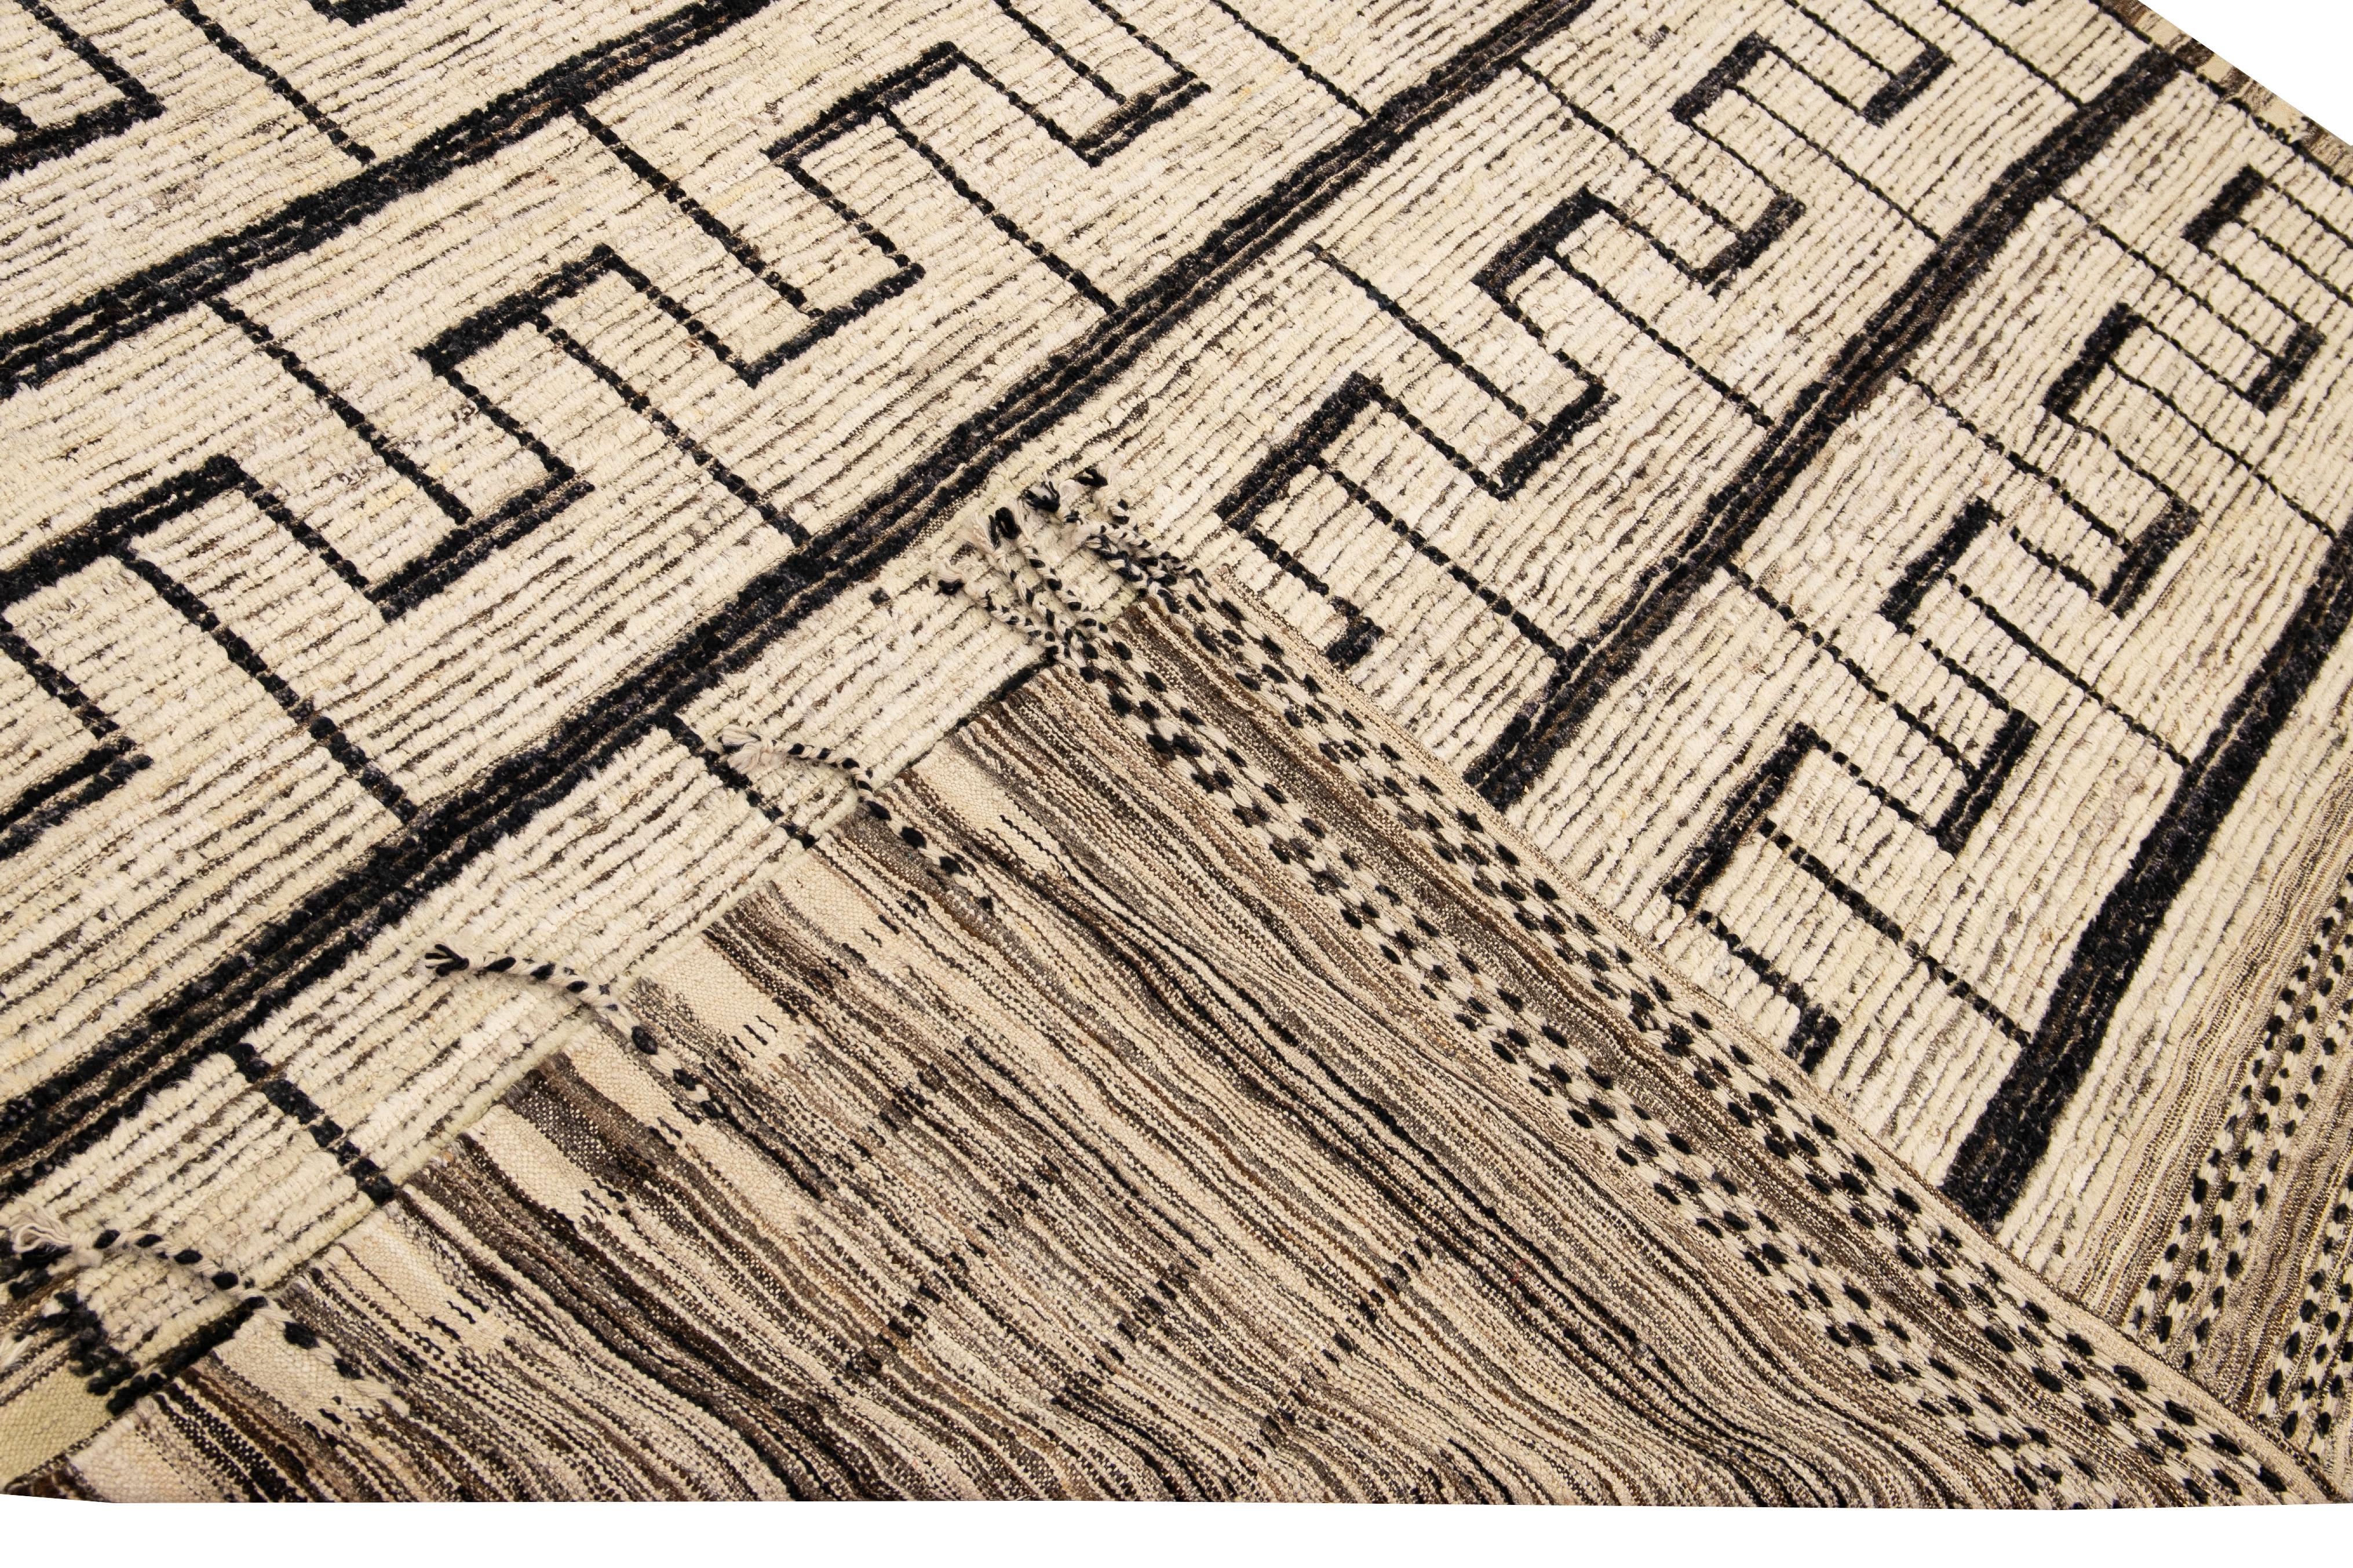 Beautiful Moroccan style handmade wool rug with a beige and brown field. This Modern rug has black and brown accents and beige-black braid fringes featuring a gorgeous all-over geometric boho design.

This rug measures: 9' x 12'6